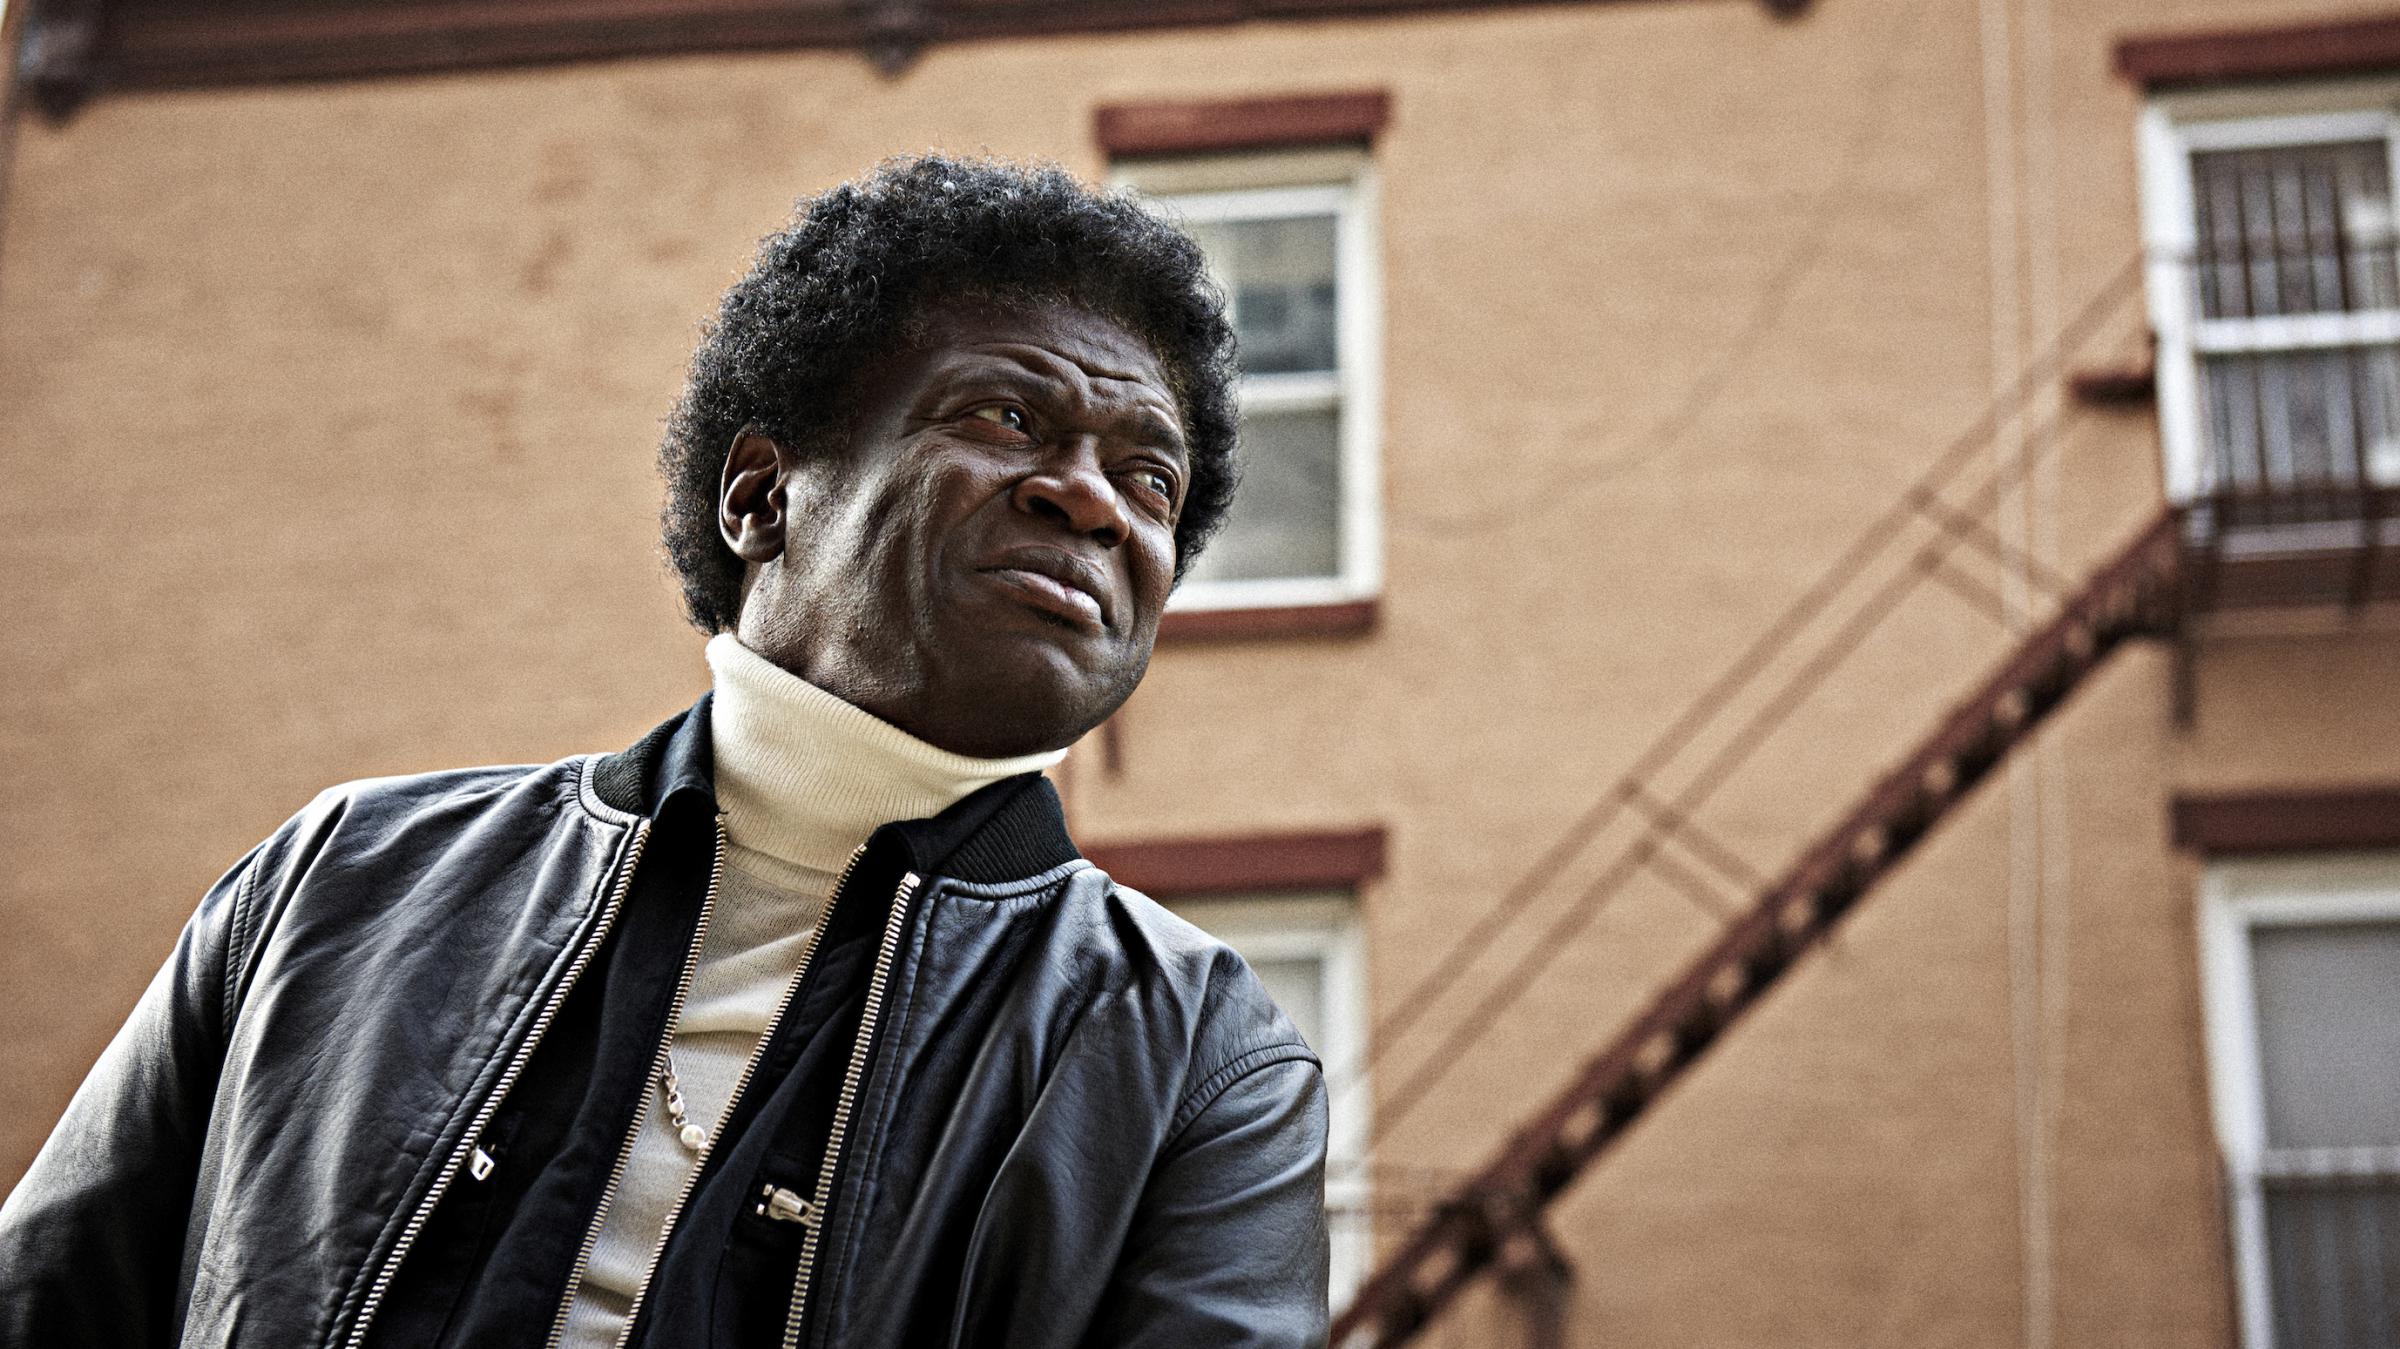 charles bradley changes flac download